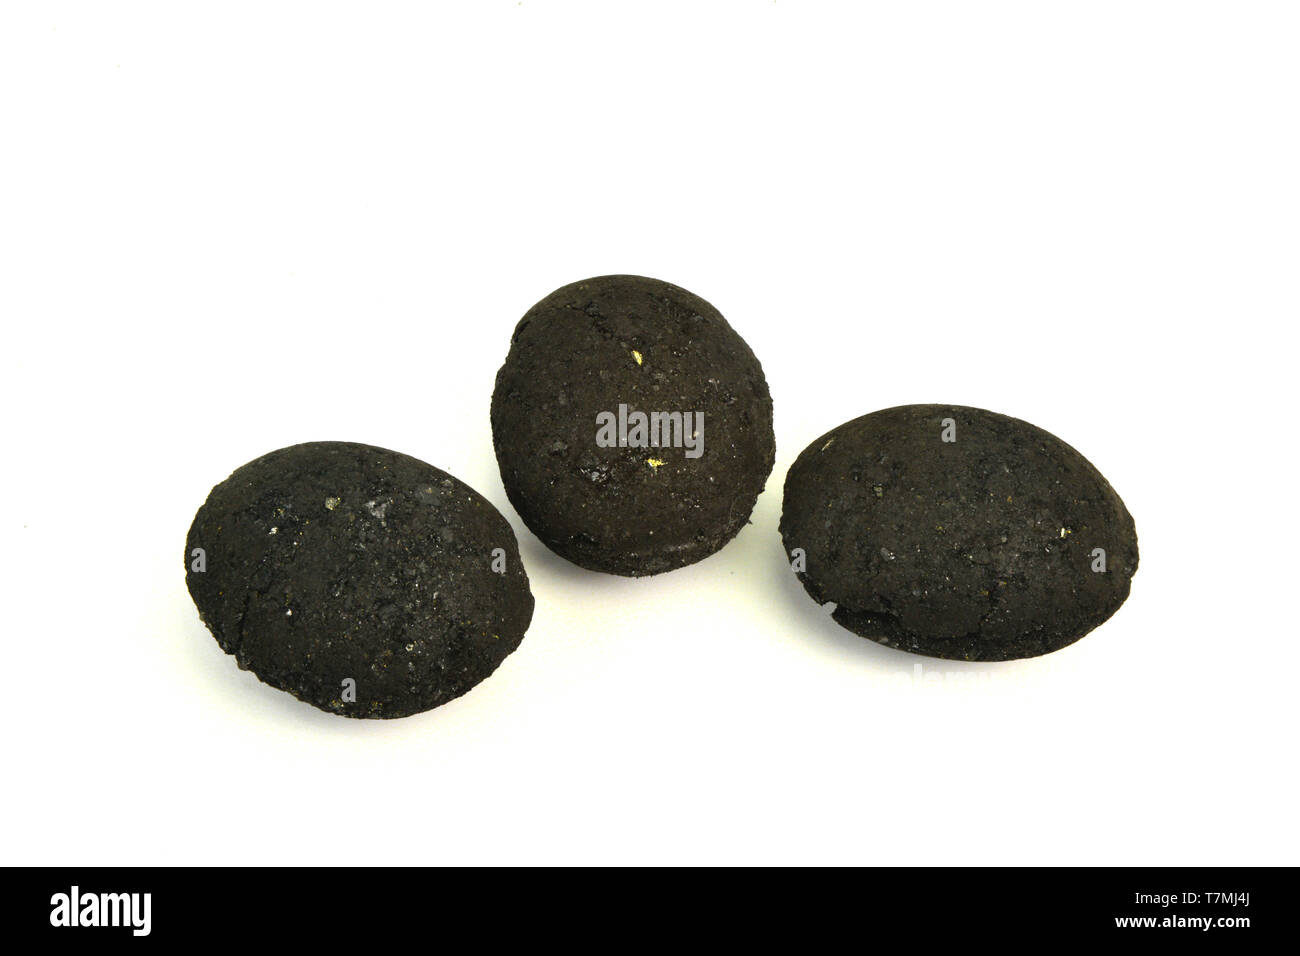 Coal, three egg-shaped briquettes made by compressing fragments and dust of mined coal. Studio picture against a white background. Germany Stock Photo